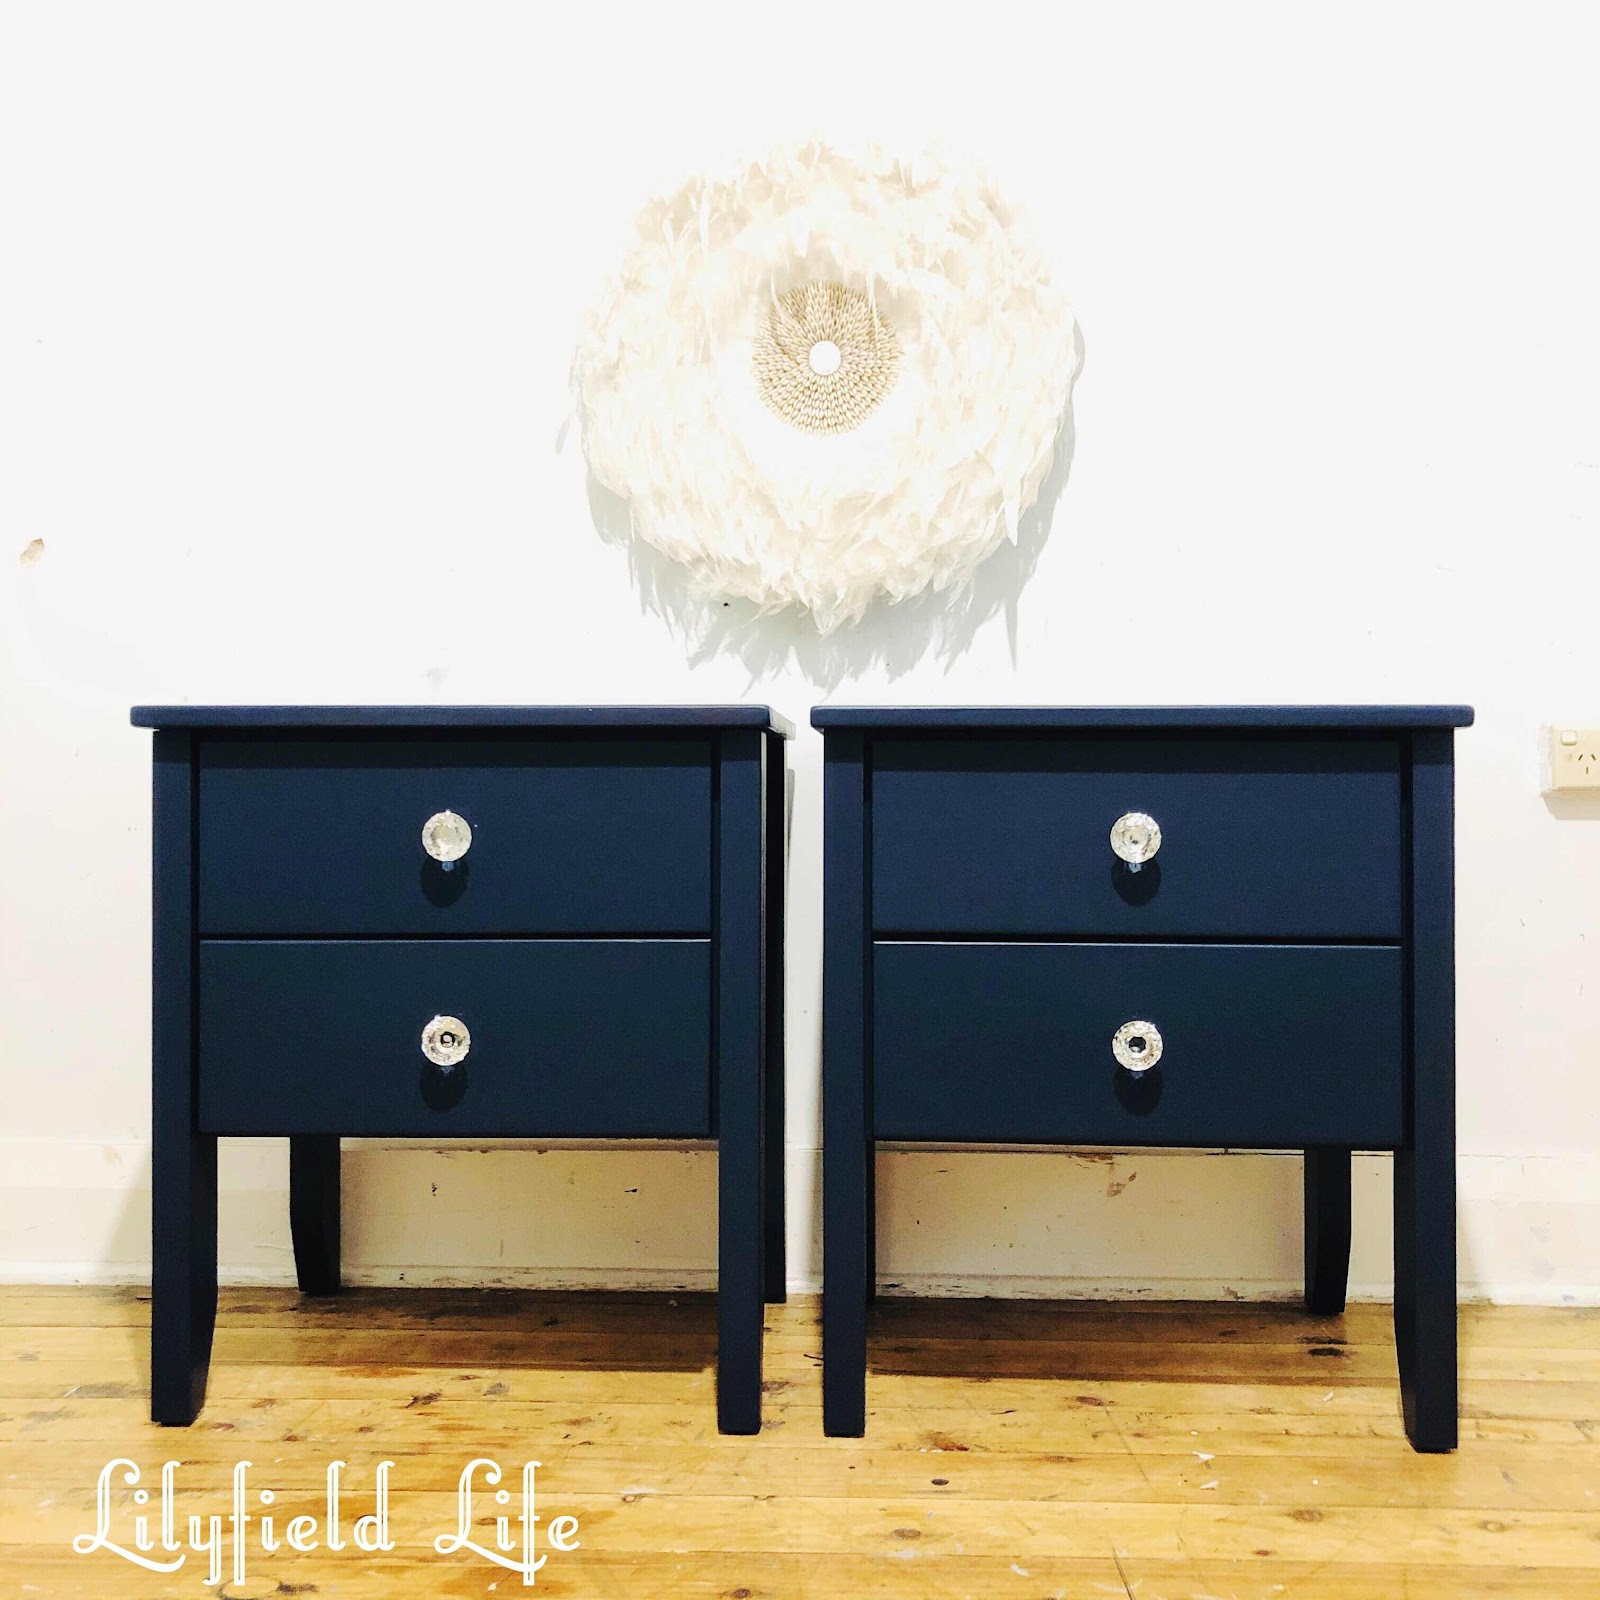 Awesome navy blue bedside table Lilyfield Life Pine Bedsides In Navy Blue Chalk Paint